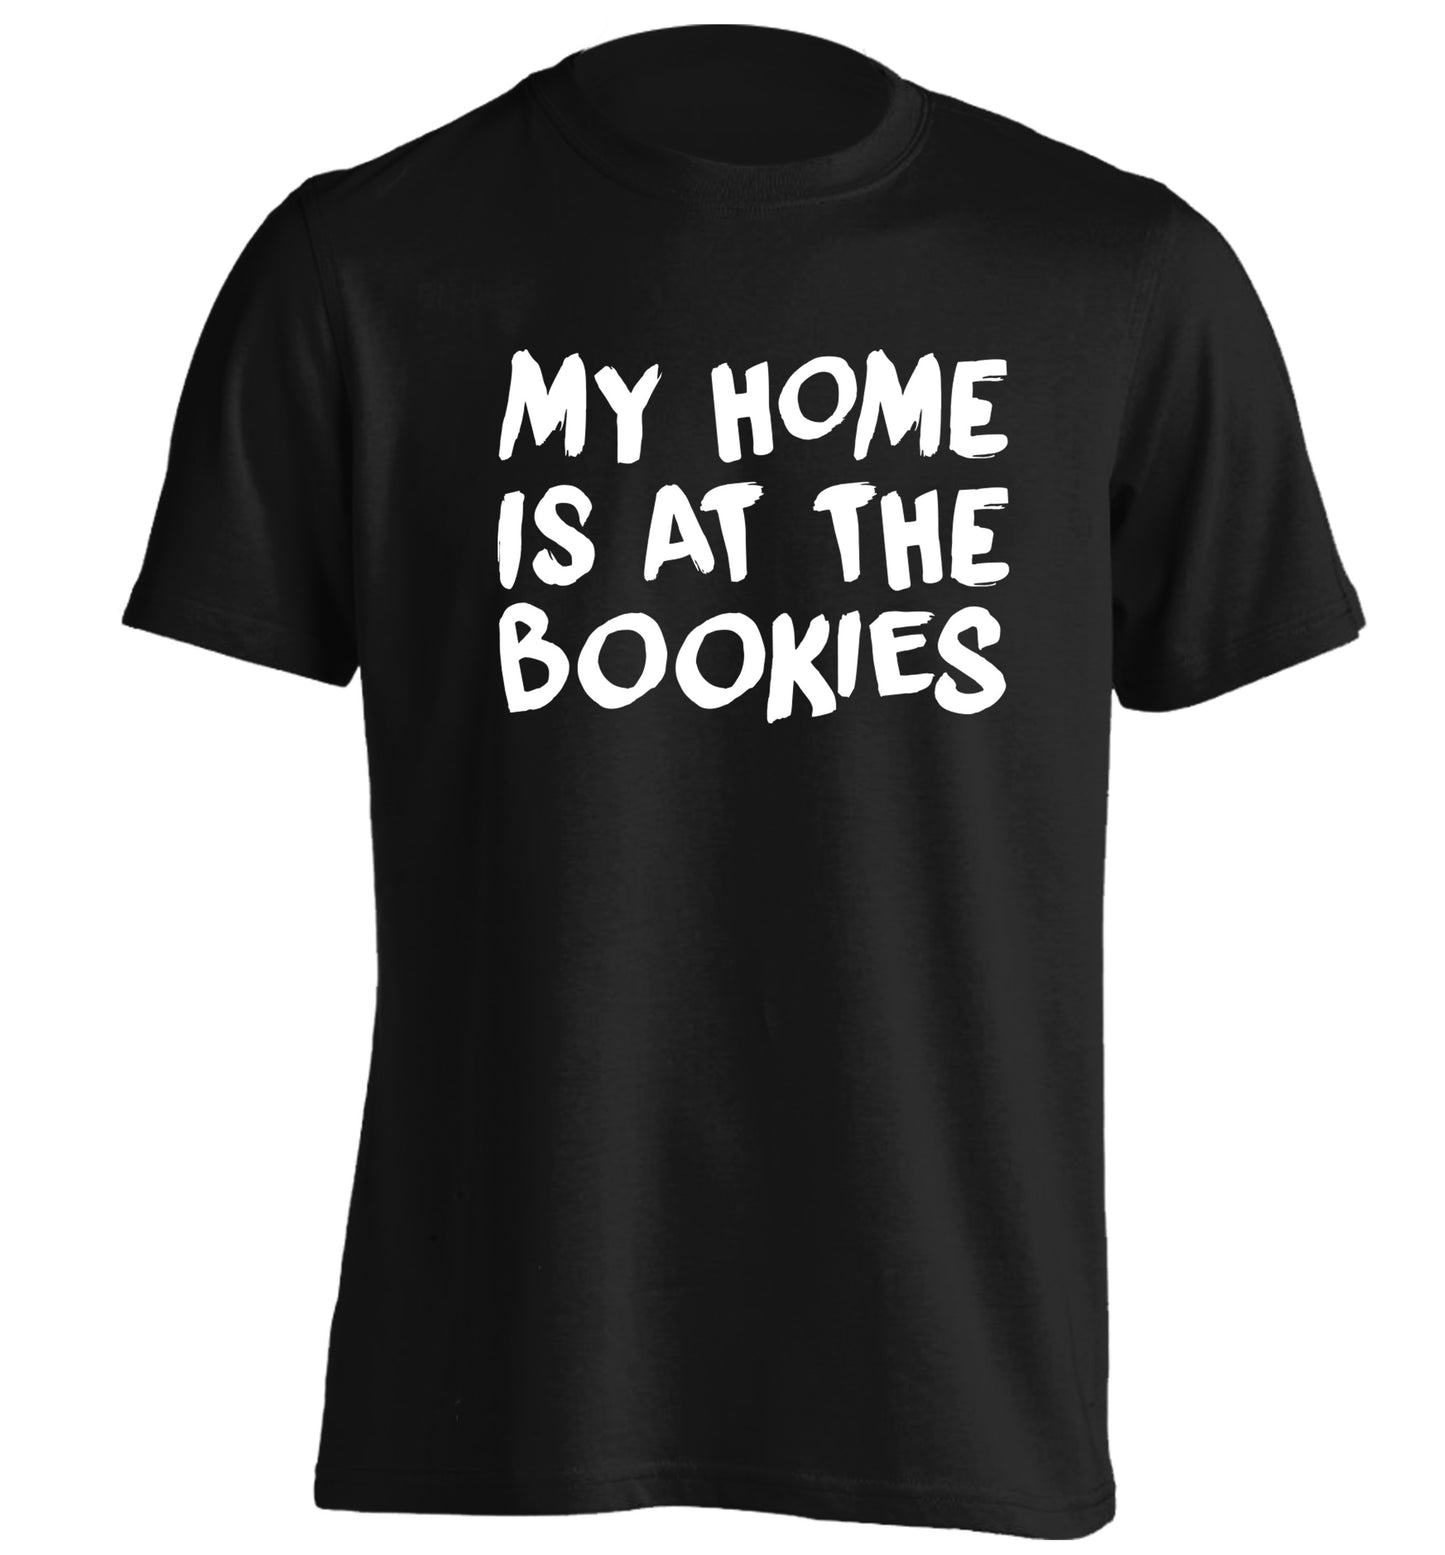 My home is at the bookies adults unisex black Tshirt 2XL